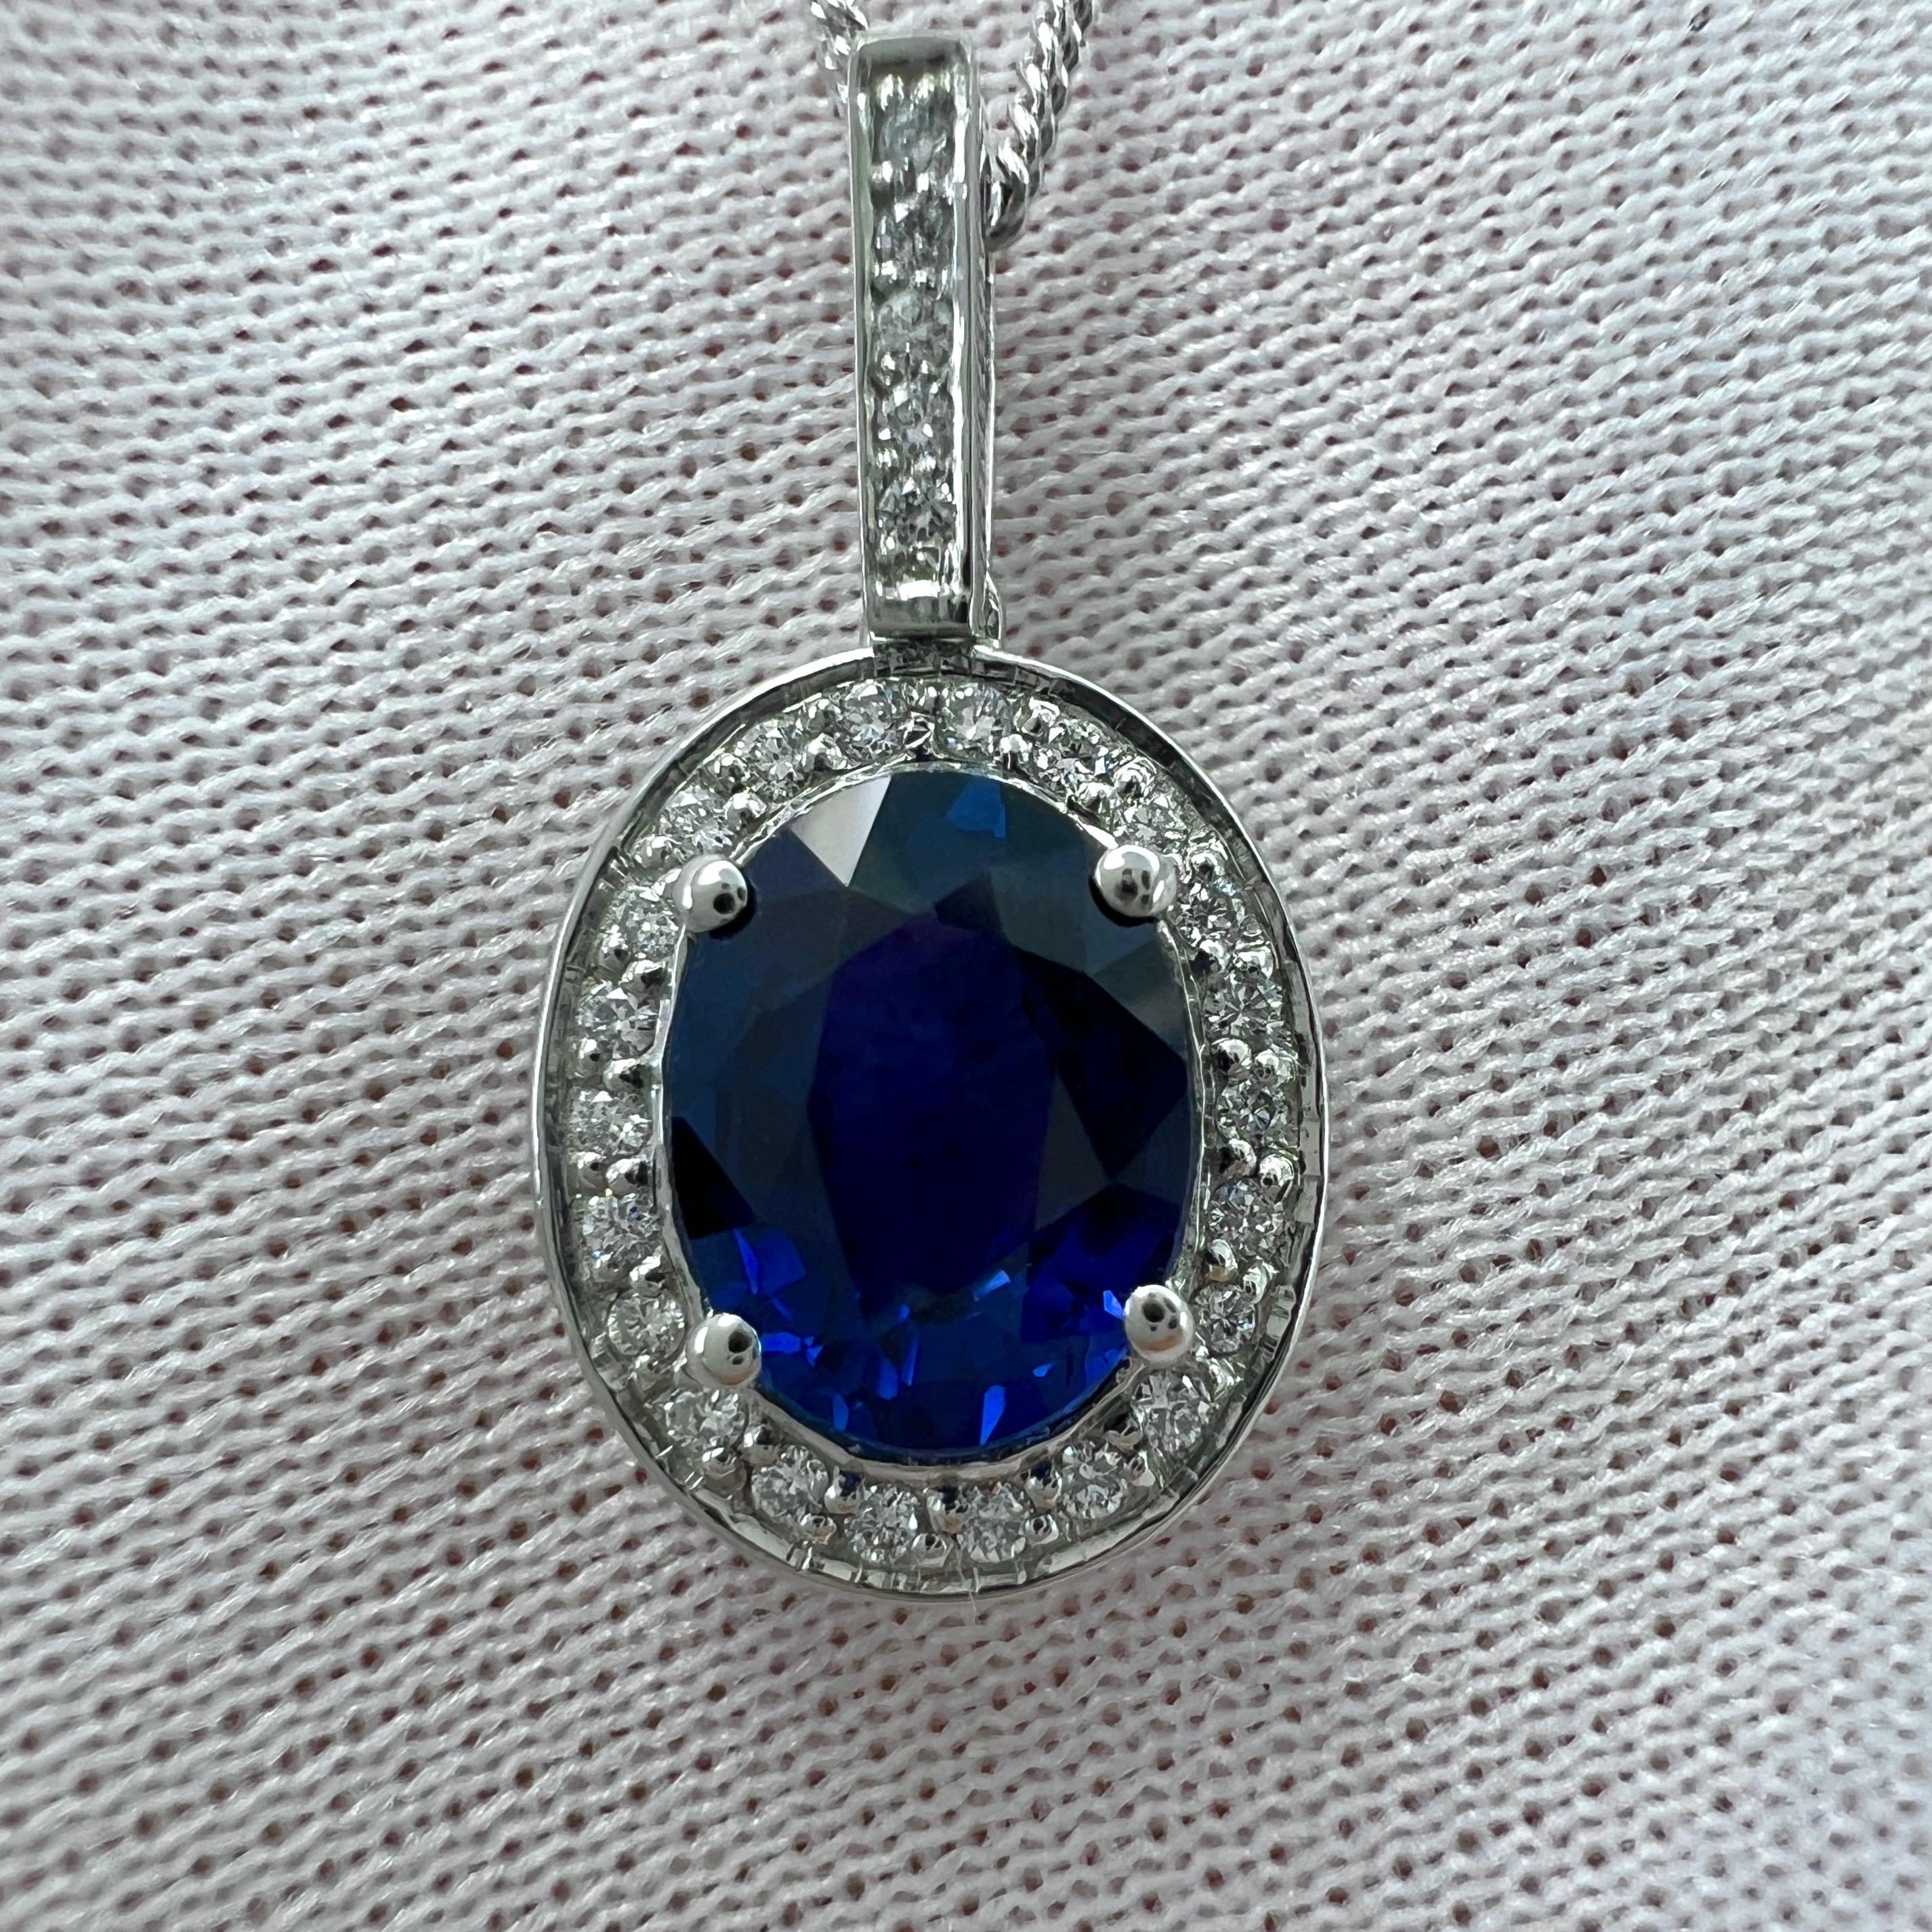 Fine Royal Blue Sapphire & Diamond Platinum Oval Halo Pendant Necklace.

GIA Certified 1.32 carat oval cut sapphire with a stunning deep royal blue colour and excellent clarity. A very clean stone, VVS.
This sapphire also has an excellent oval cut